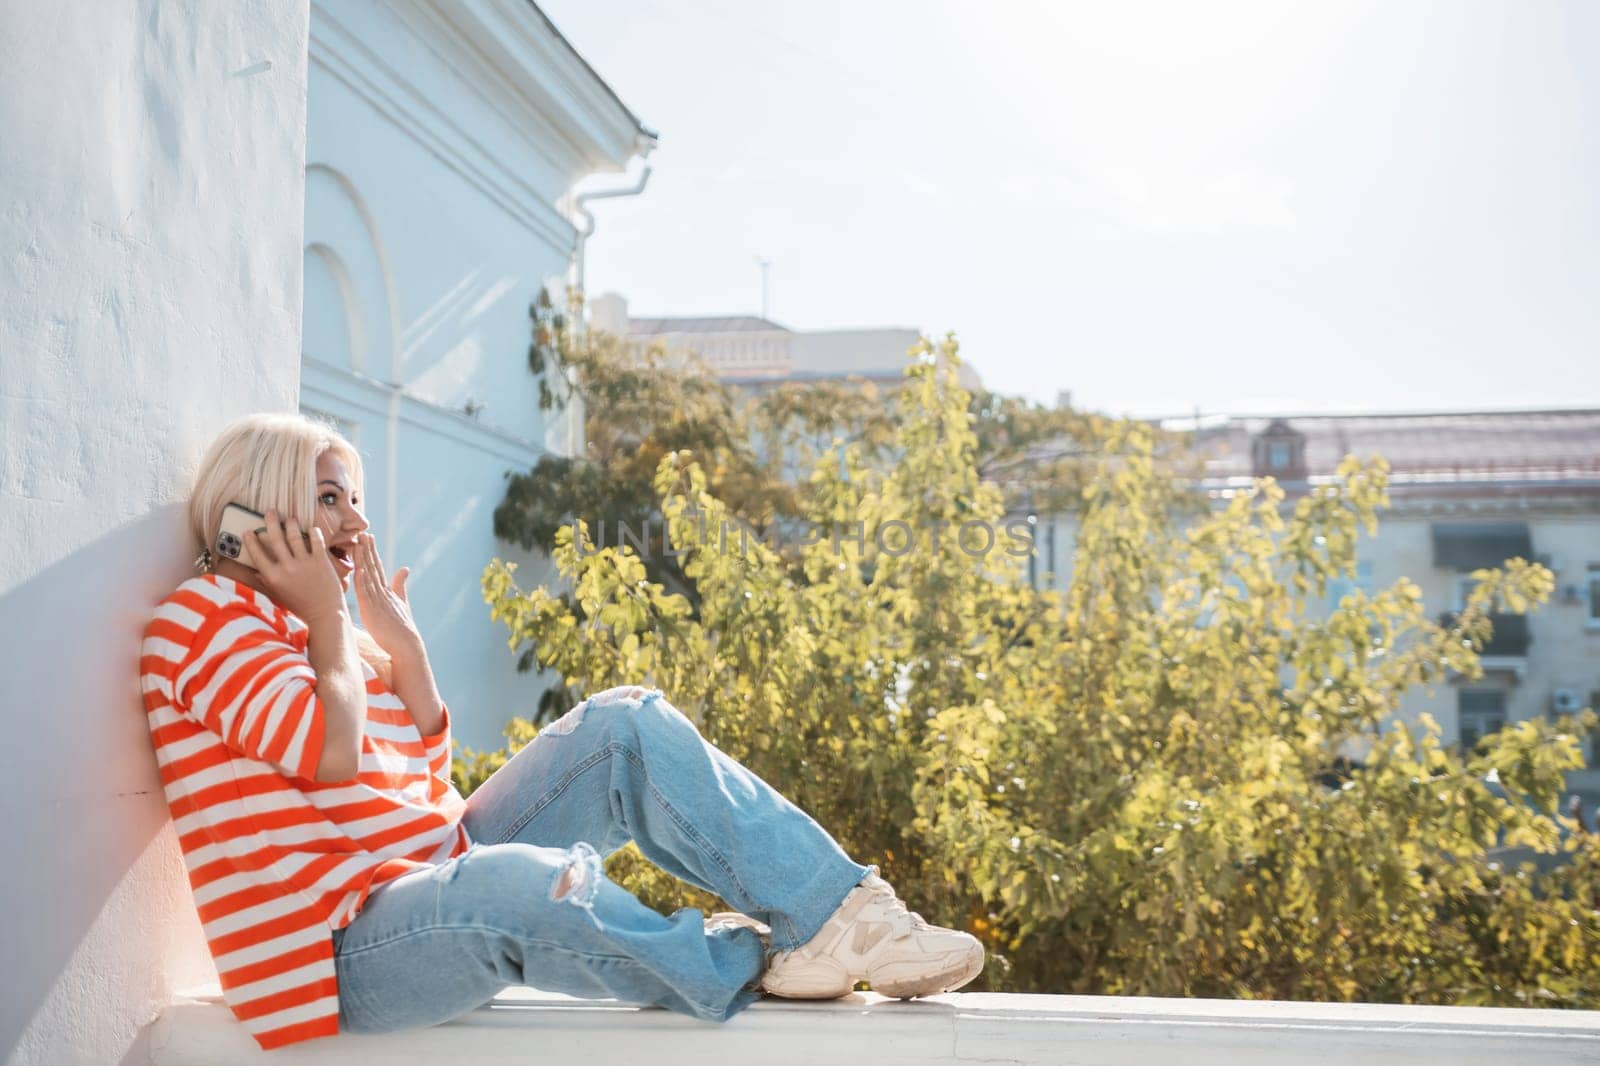 A woman is sitting on a ledge with her phone in her hand. She is wearing a striped shirt and blue jeans. The scene is set in a city with a tree in the background. by Matiunina